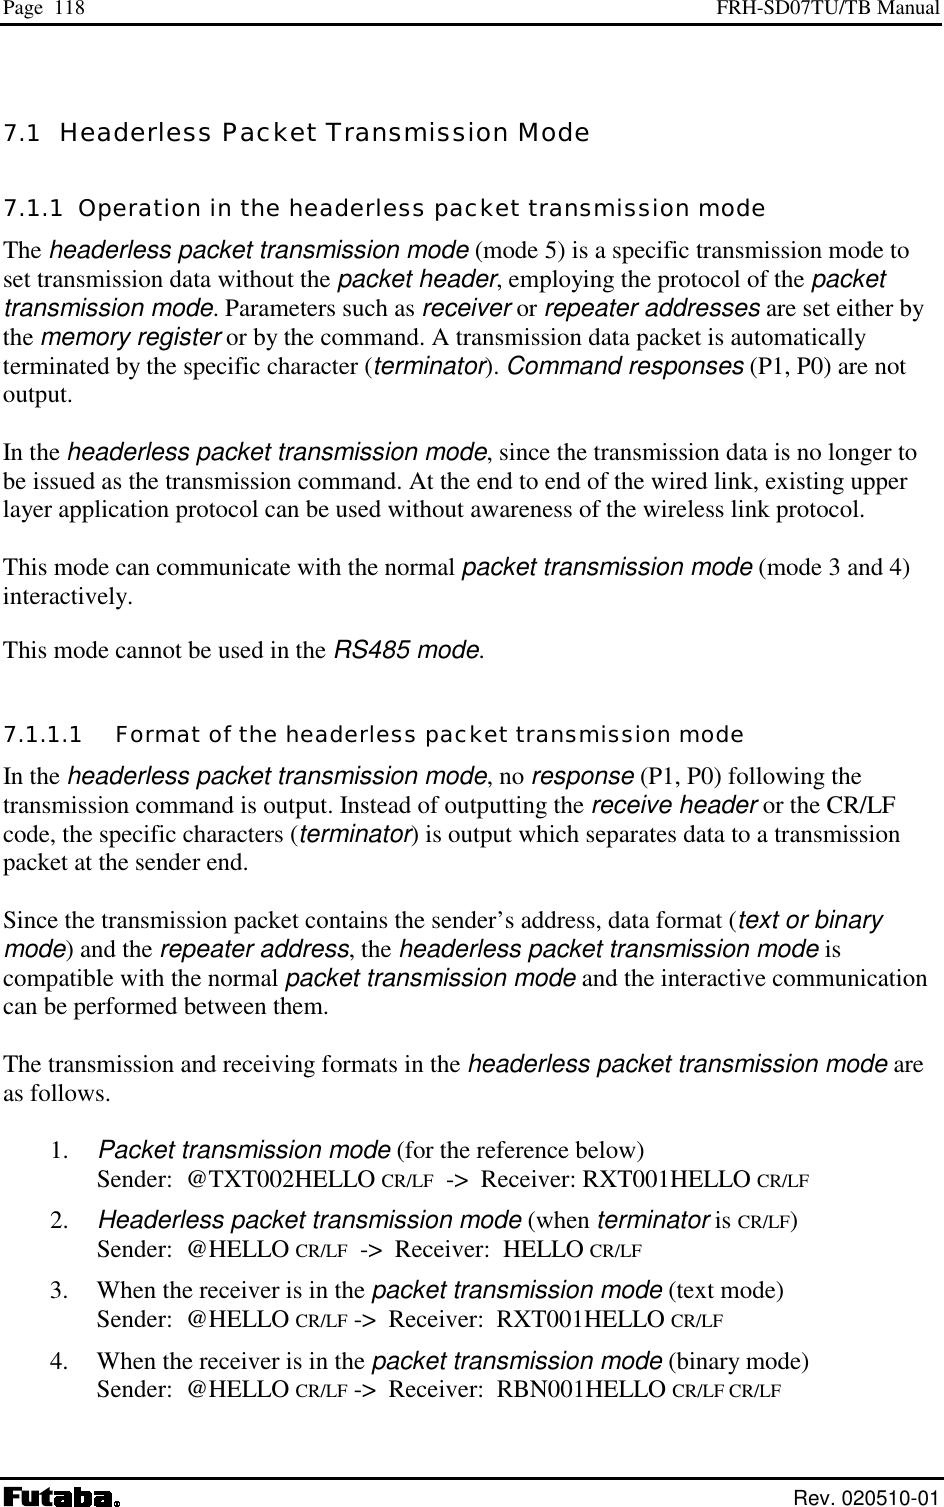 Page  118  FRH-SD07TU/TB Manual  Rev. 020510-01 7.1  Headerless Packet Transmission Mode  7.1.1  Operation in the headerless packet transmission mode The headerless packet transmission mode (mode 5) is a specific transmission mode to set transmission data without the packet header, employing the protocol of the packet transmission mode. Parameters such as receiver or repeater addresses are set either by the memory register or by the command. A transmission data packet is automatically terminated by the specific character (terminator). Command responses (P1, P0) are not output.  In the headerless packet transmission mode, since the transmission data is no longer to be issued as the transmission command. At the end to end of the wired link, existing upper layer application protocol can be used without awareness of the wireless link protocol.  This mode can communicate with the normal packet transmission mode (mode 3 and 4) interactively. This mode cannot be used in the RS485 mode. 7.1.1.1   Format of the headerless packet transmission mode In the headerless packet transmission mode, no response (P1, P0) following the transmission command is output. Instead of outputting the receive header or the CR/LF code, the specific characters (terminator) is output which separates data to a transmission packet at the sender end.   Since the transmission packet contains the sender’s address, data format (text or binary mode) and the repeater address, the headerless packet transmission mode is compatible with the normal packet transmission mode and the interactive communication can be performed between them.  The transmission and receiving formats in the headerless packet transmission mode are as follows.  1.   Packet transmission mode (for the reference below) Sender:  @TXT002HELLO CR/LF  -&gt;  Receiver: RXT001HELLO CR/LF 2.   Headerless packet transmission mode (when terminator is CR/LF) Sender:  @HELLO CR/LF  -&gt;  Receiver:  HELLO CR/LF 3.   When the receiver is in the packet transmission mode (text mode) Sender:  @HELLO CR/LF -&gt;  Receiver:  RXT001HELLO CR/LF 4.   When the receiver is in the packet transmission mode (binary mode) Sender:  @HELLO CR/LF -&gt;  Receiver:  RBN001HELLO CR/LF CR/LF 